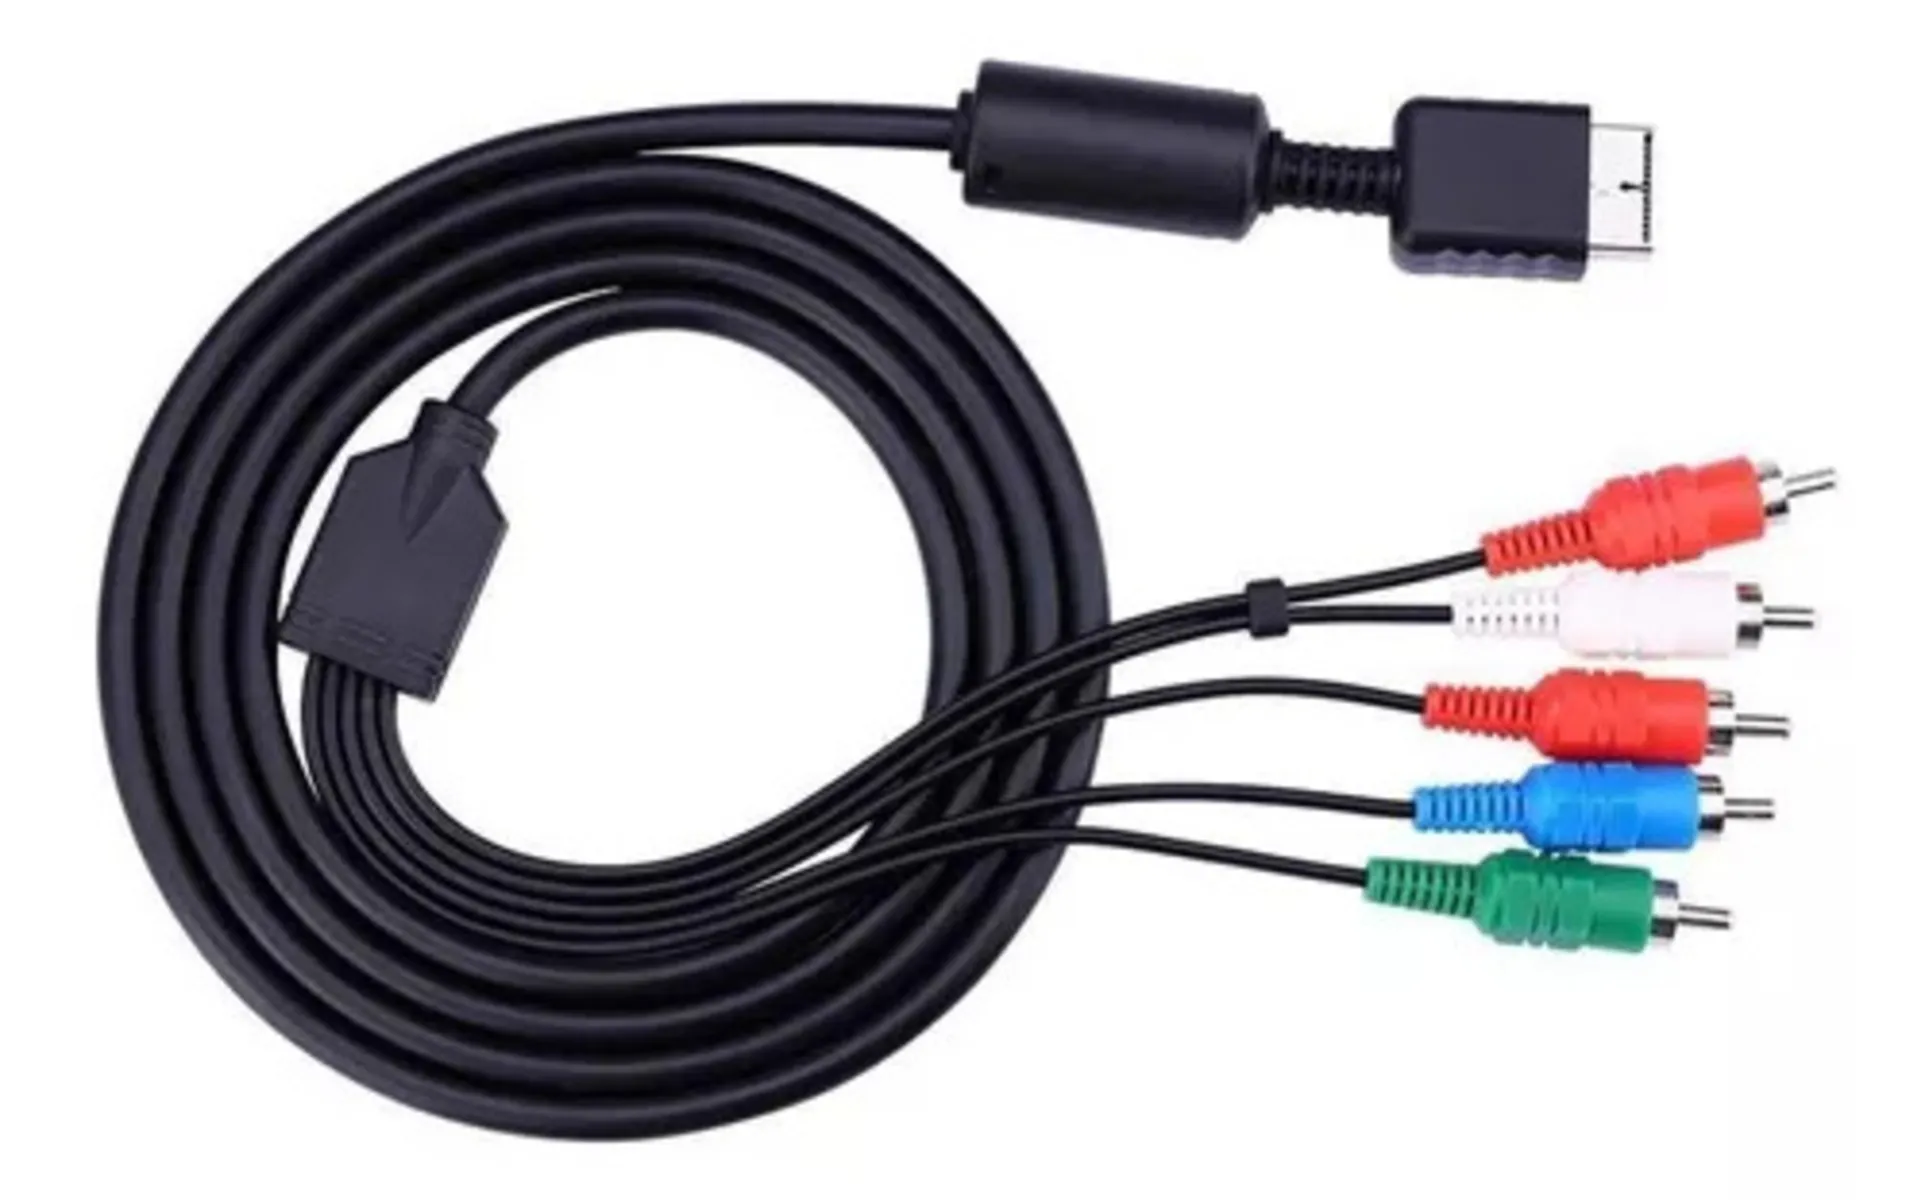 Cable Video Componente Para Ps2 Y Ps3 Ideal Lcd Led Smart Tv